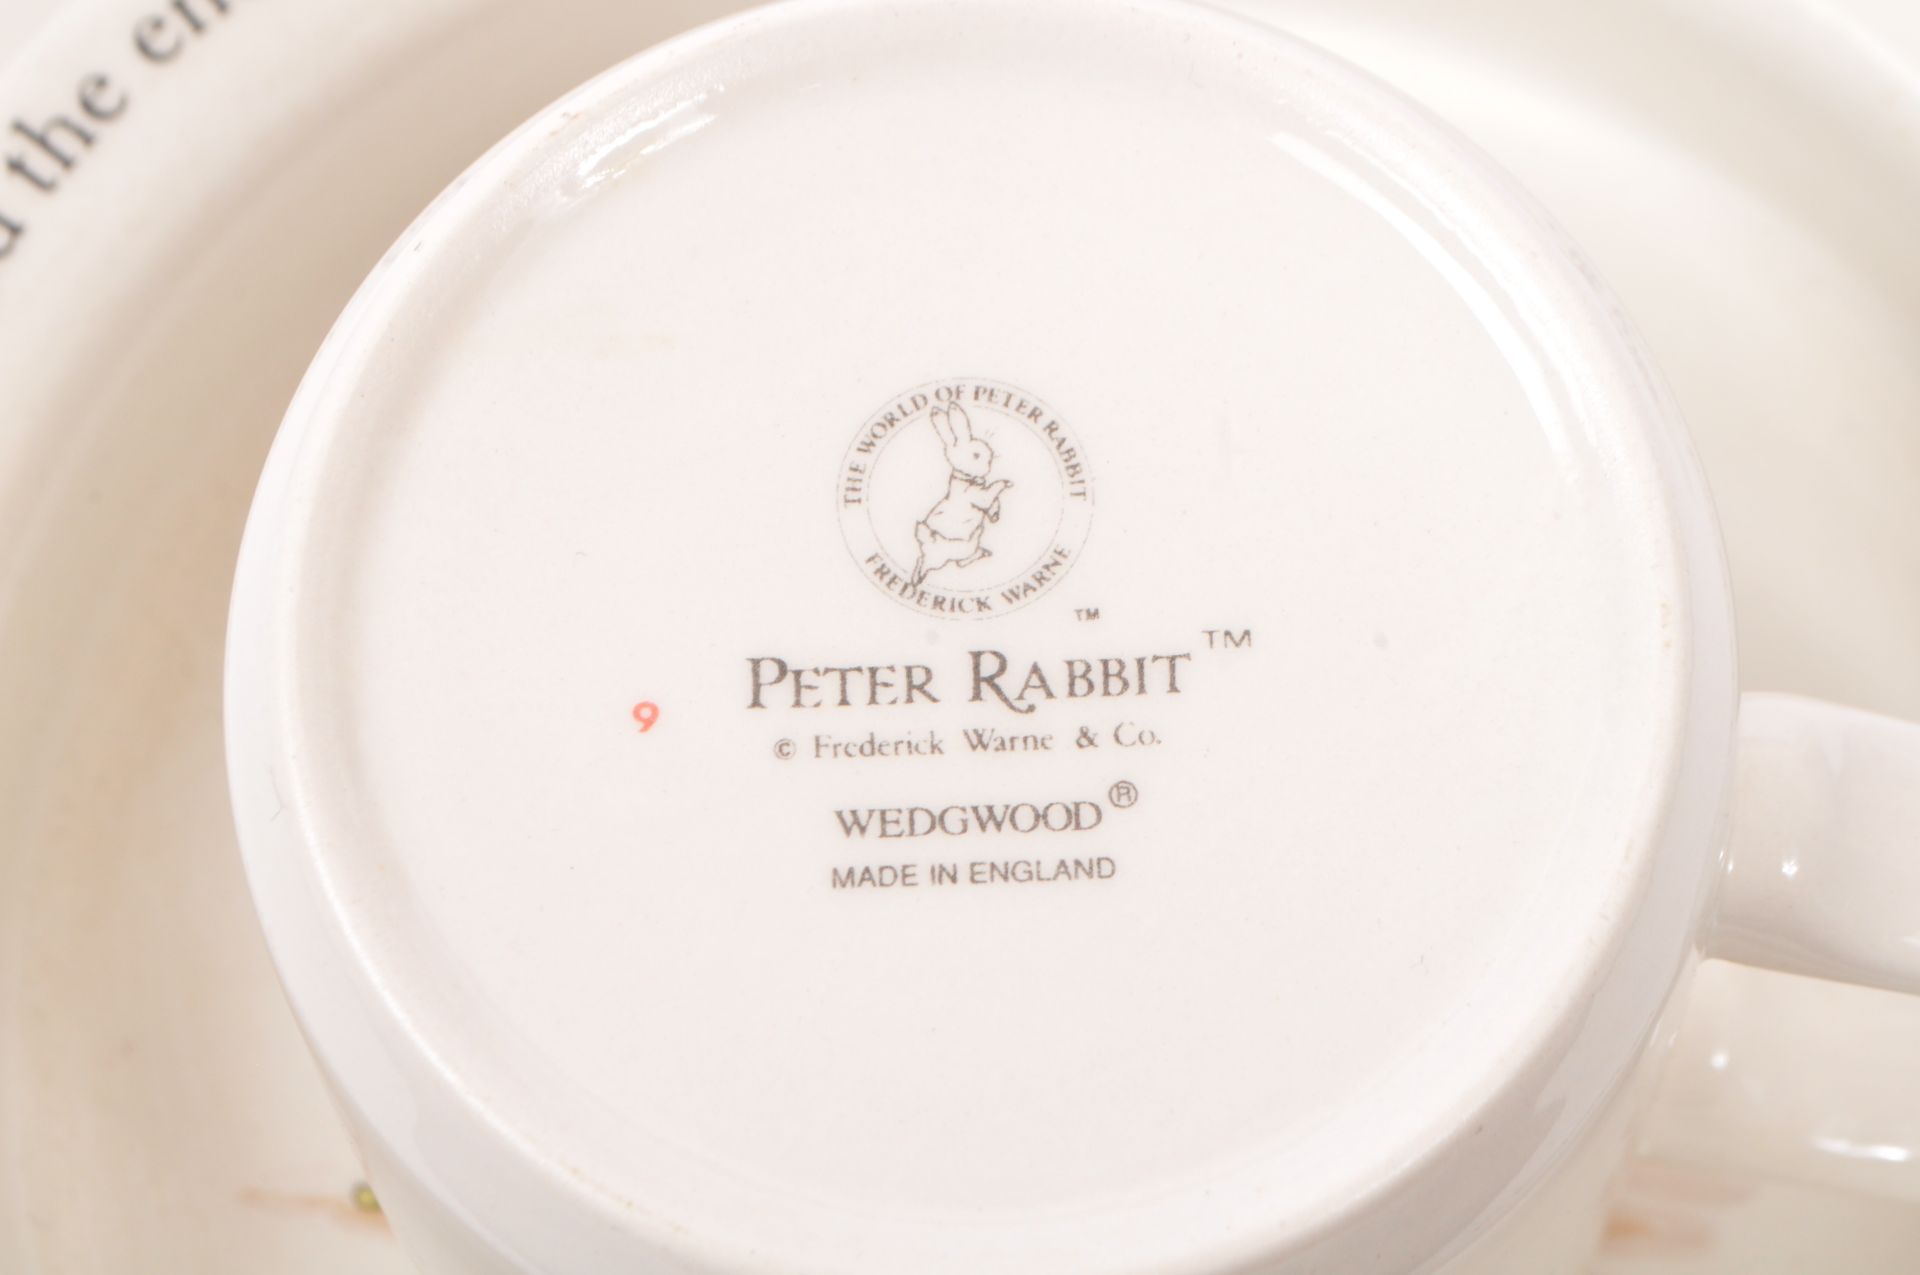 WEDGWOOD - COLLECTION OF PETER RABBIT CHINA PORCELAIN PLATES - Image 9 of 9